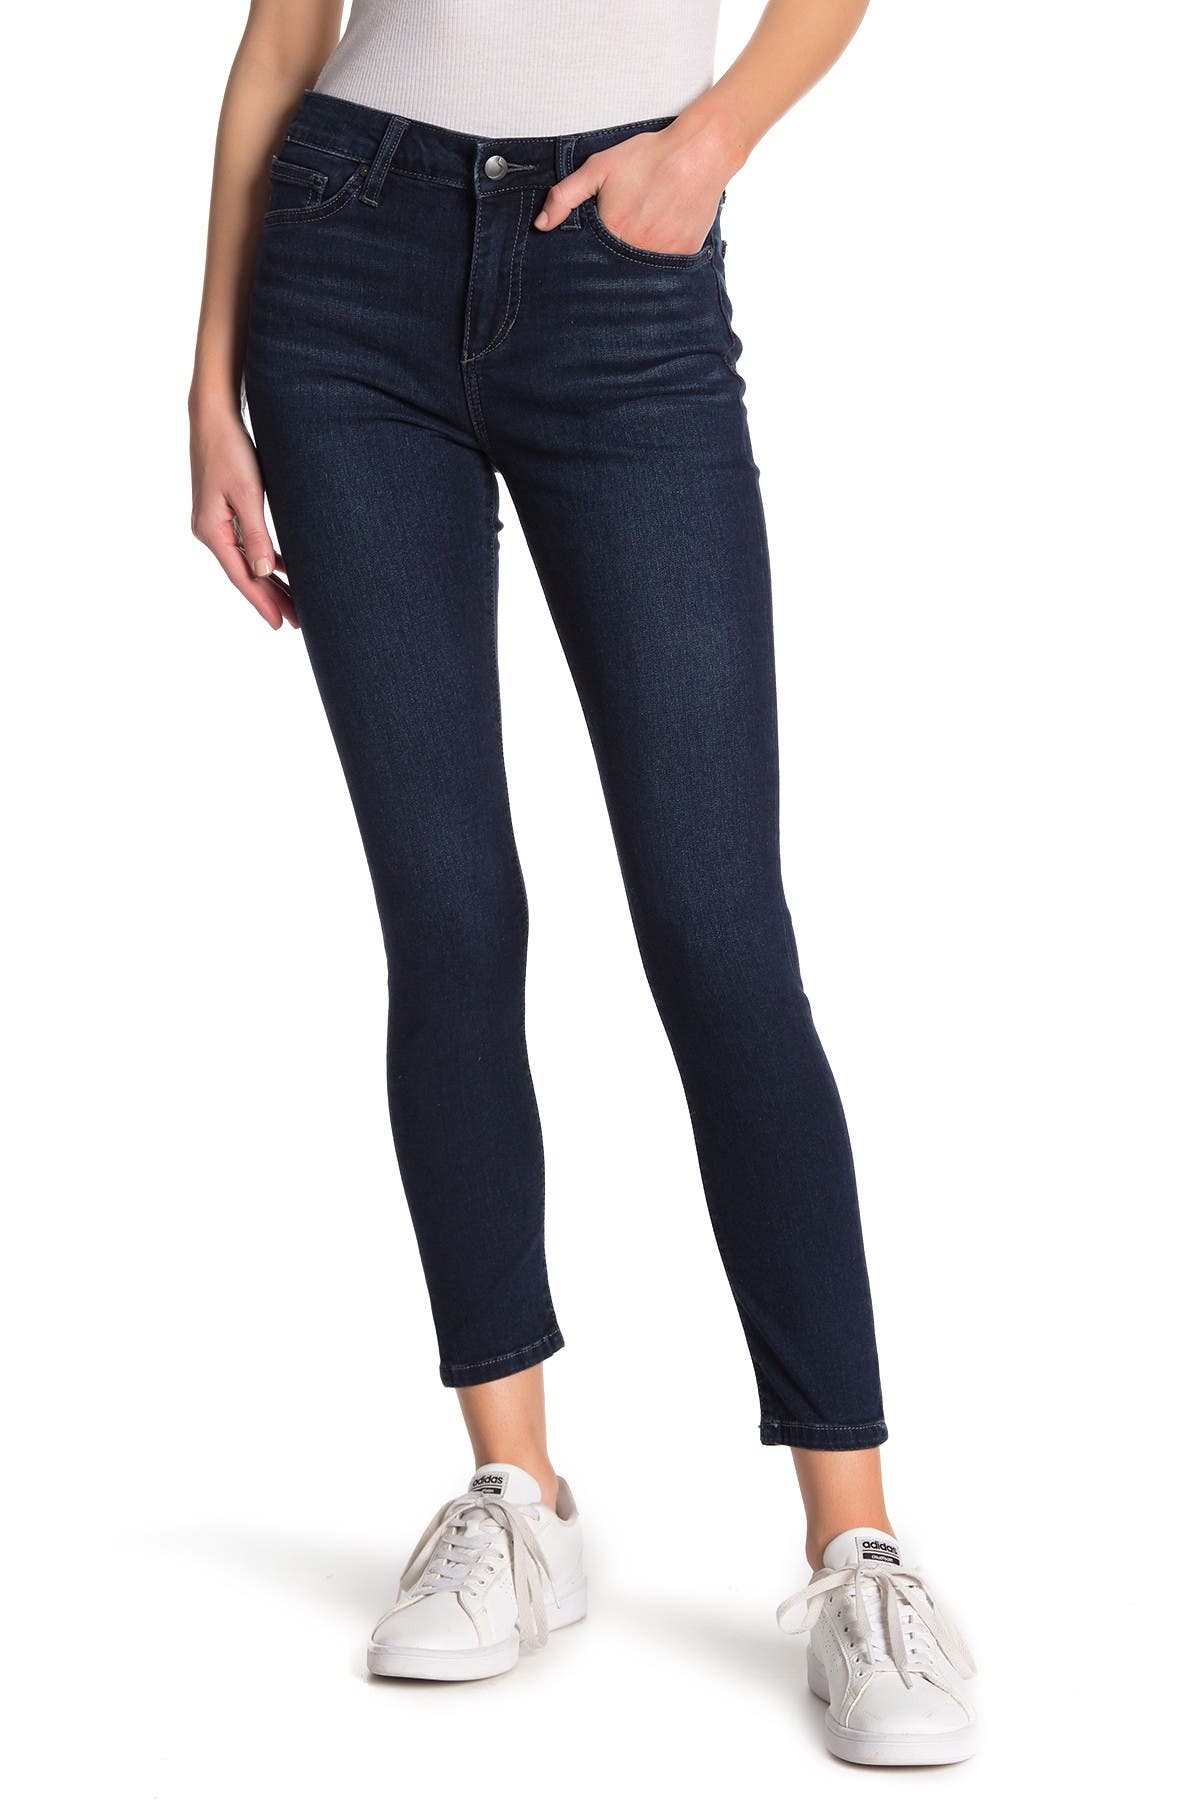 skinny fit ankle pants